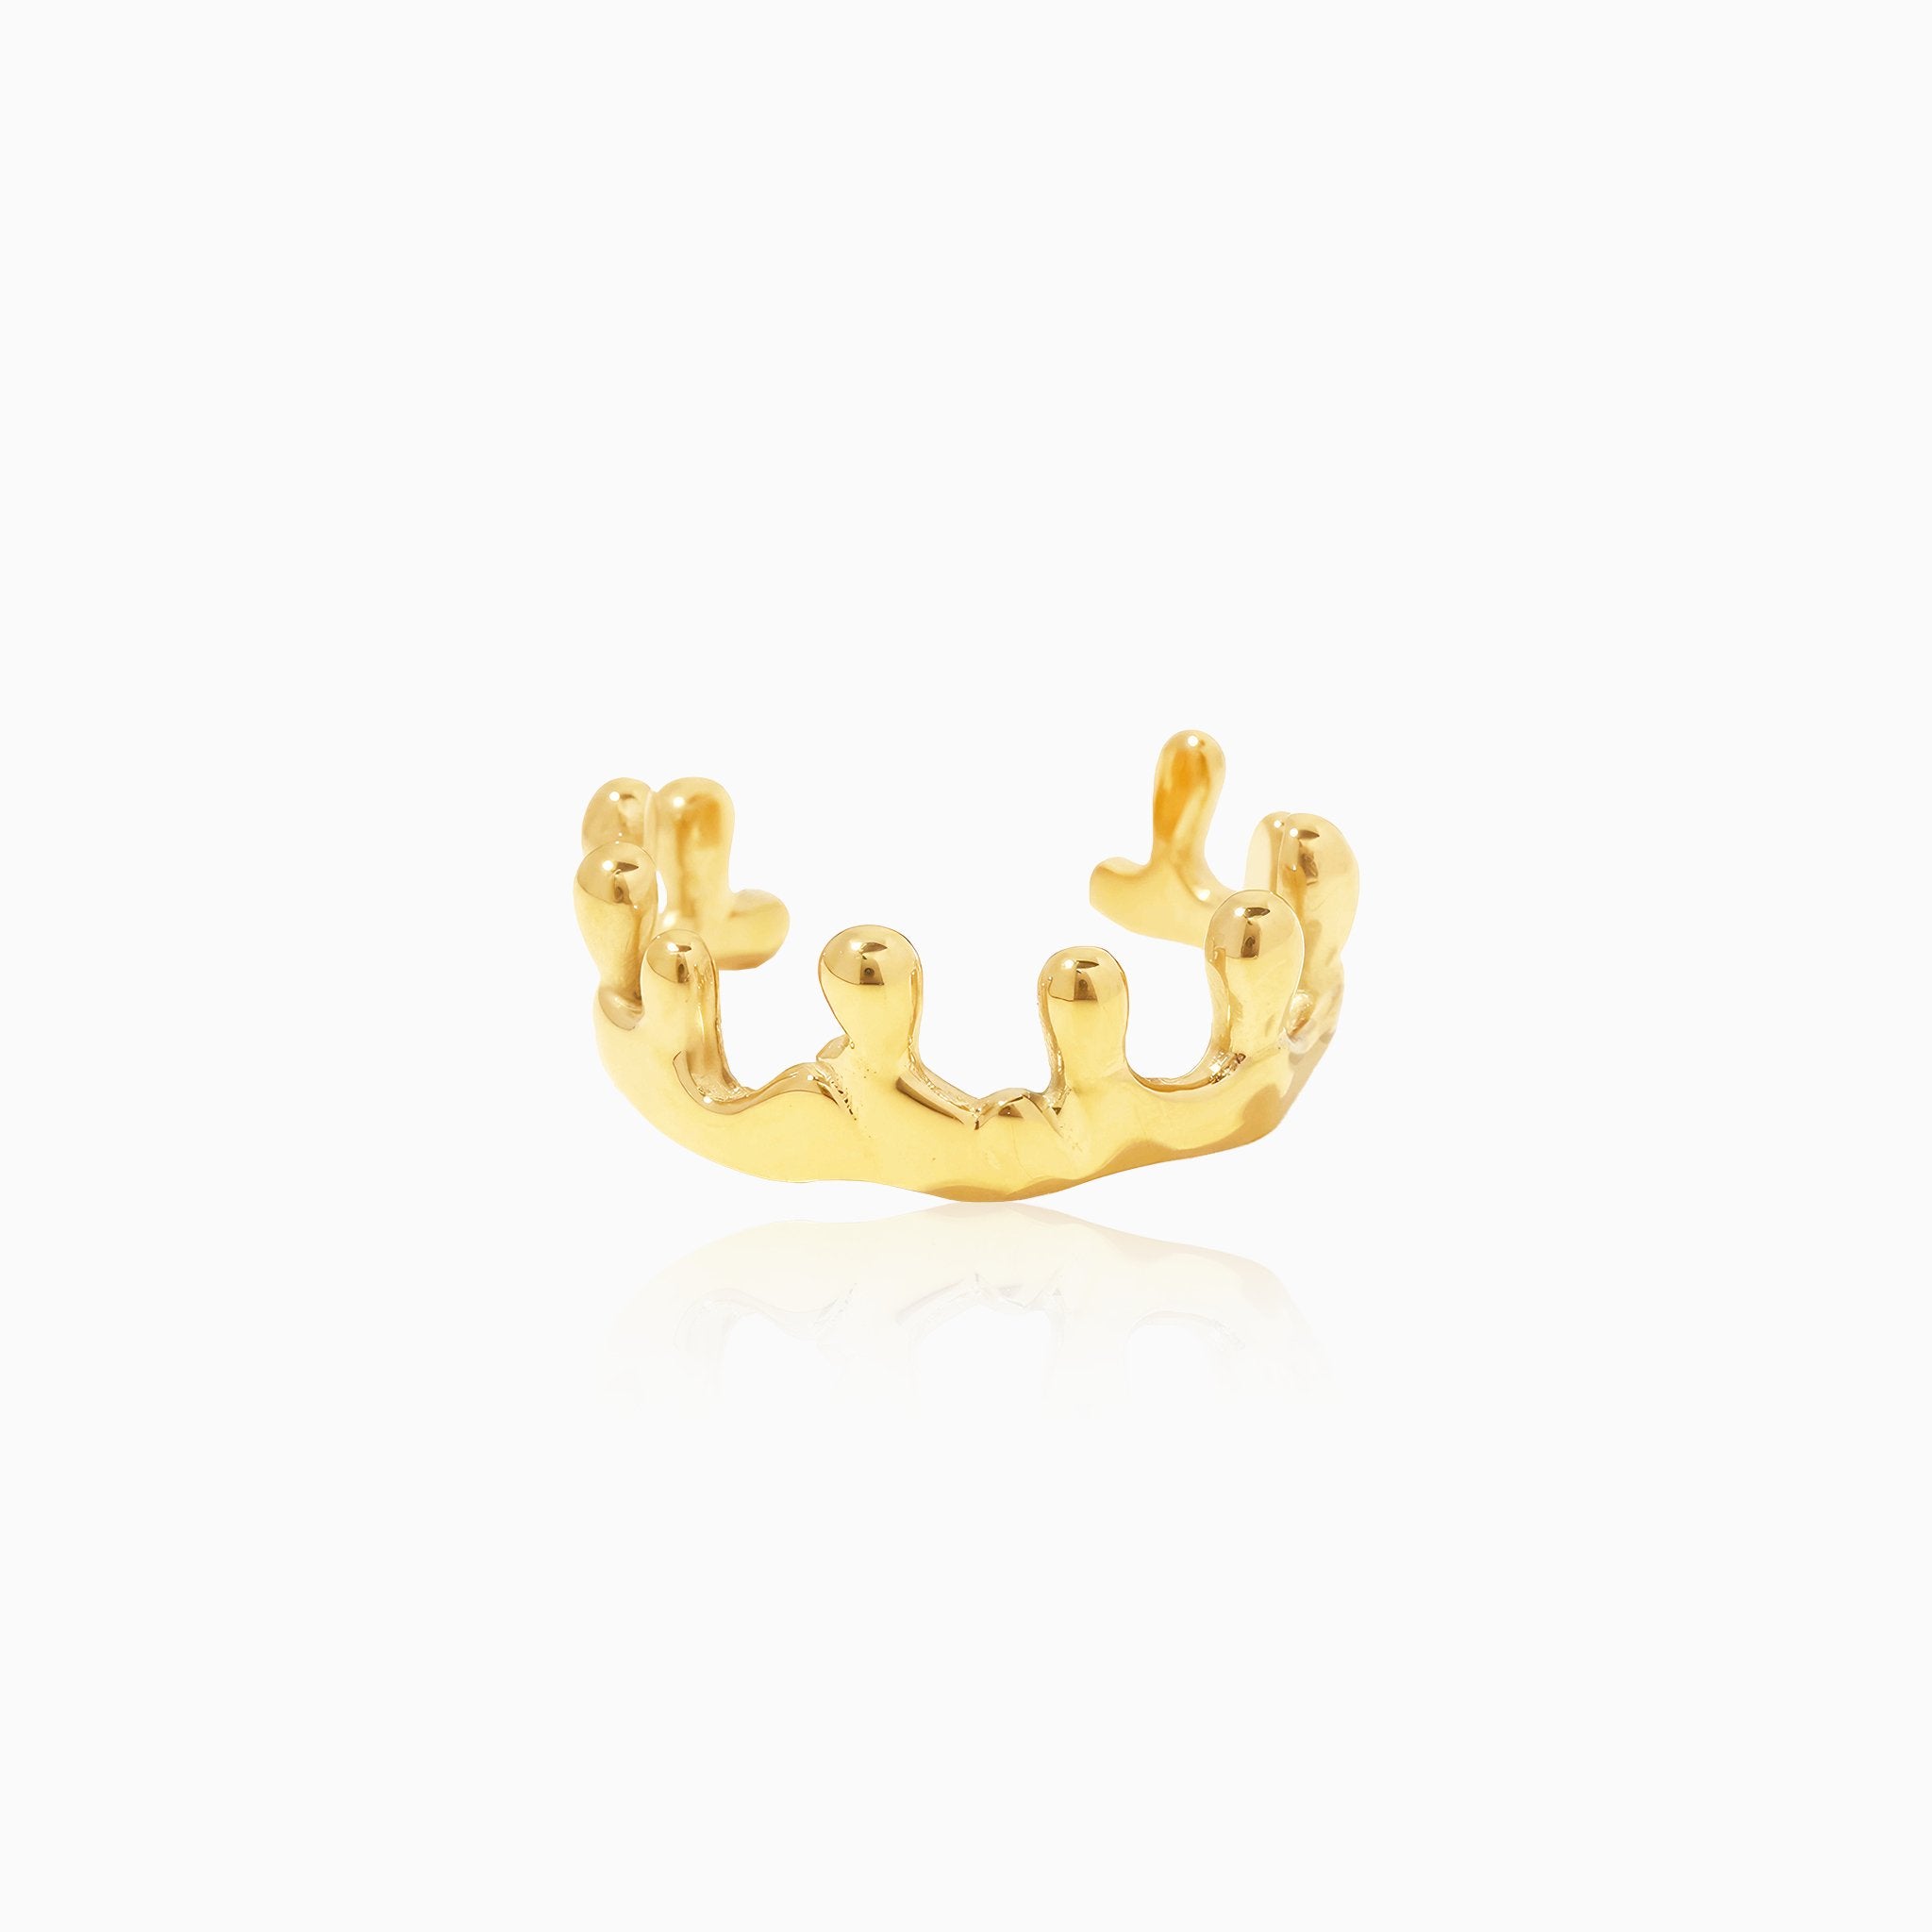 Crown Open Geometric Ring - Nobbier - Ring - 18K Gold And Titanium PVD Coated Jewelry